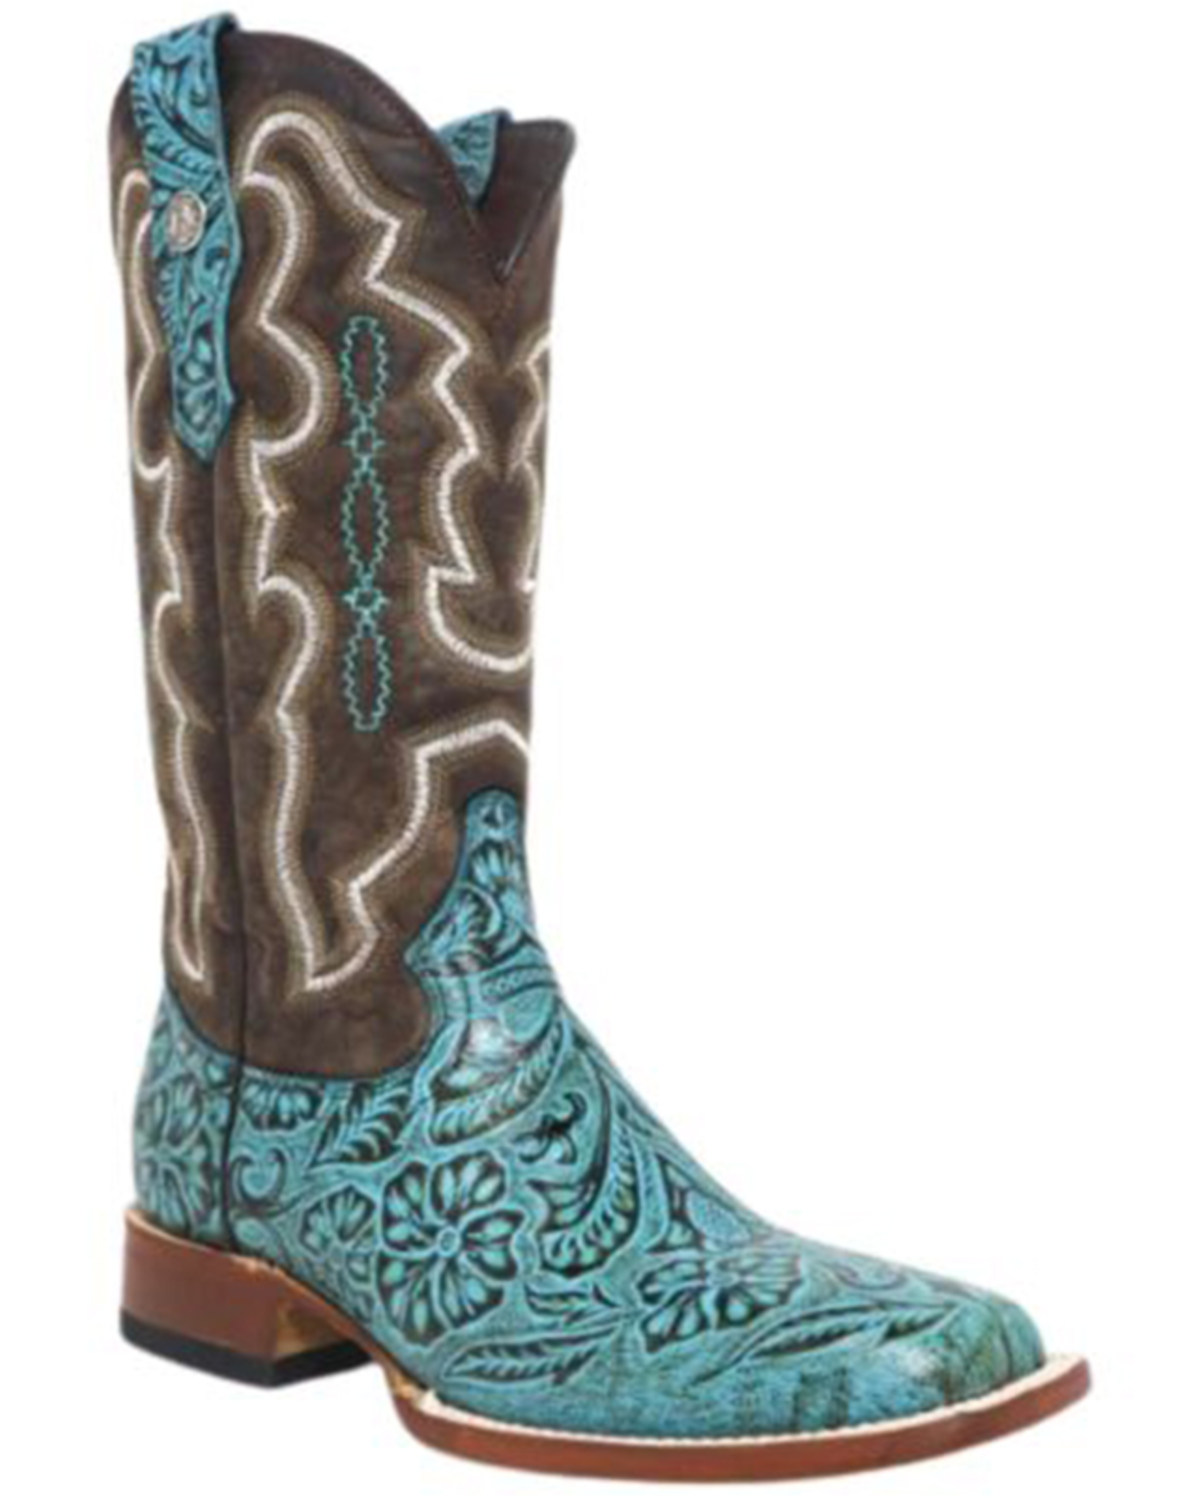 Tanner Mark Women's Misty Tooled Western Boots - Broad Square Toe